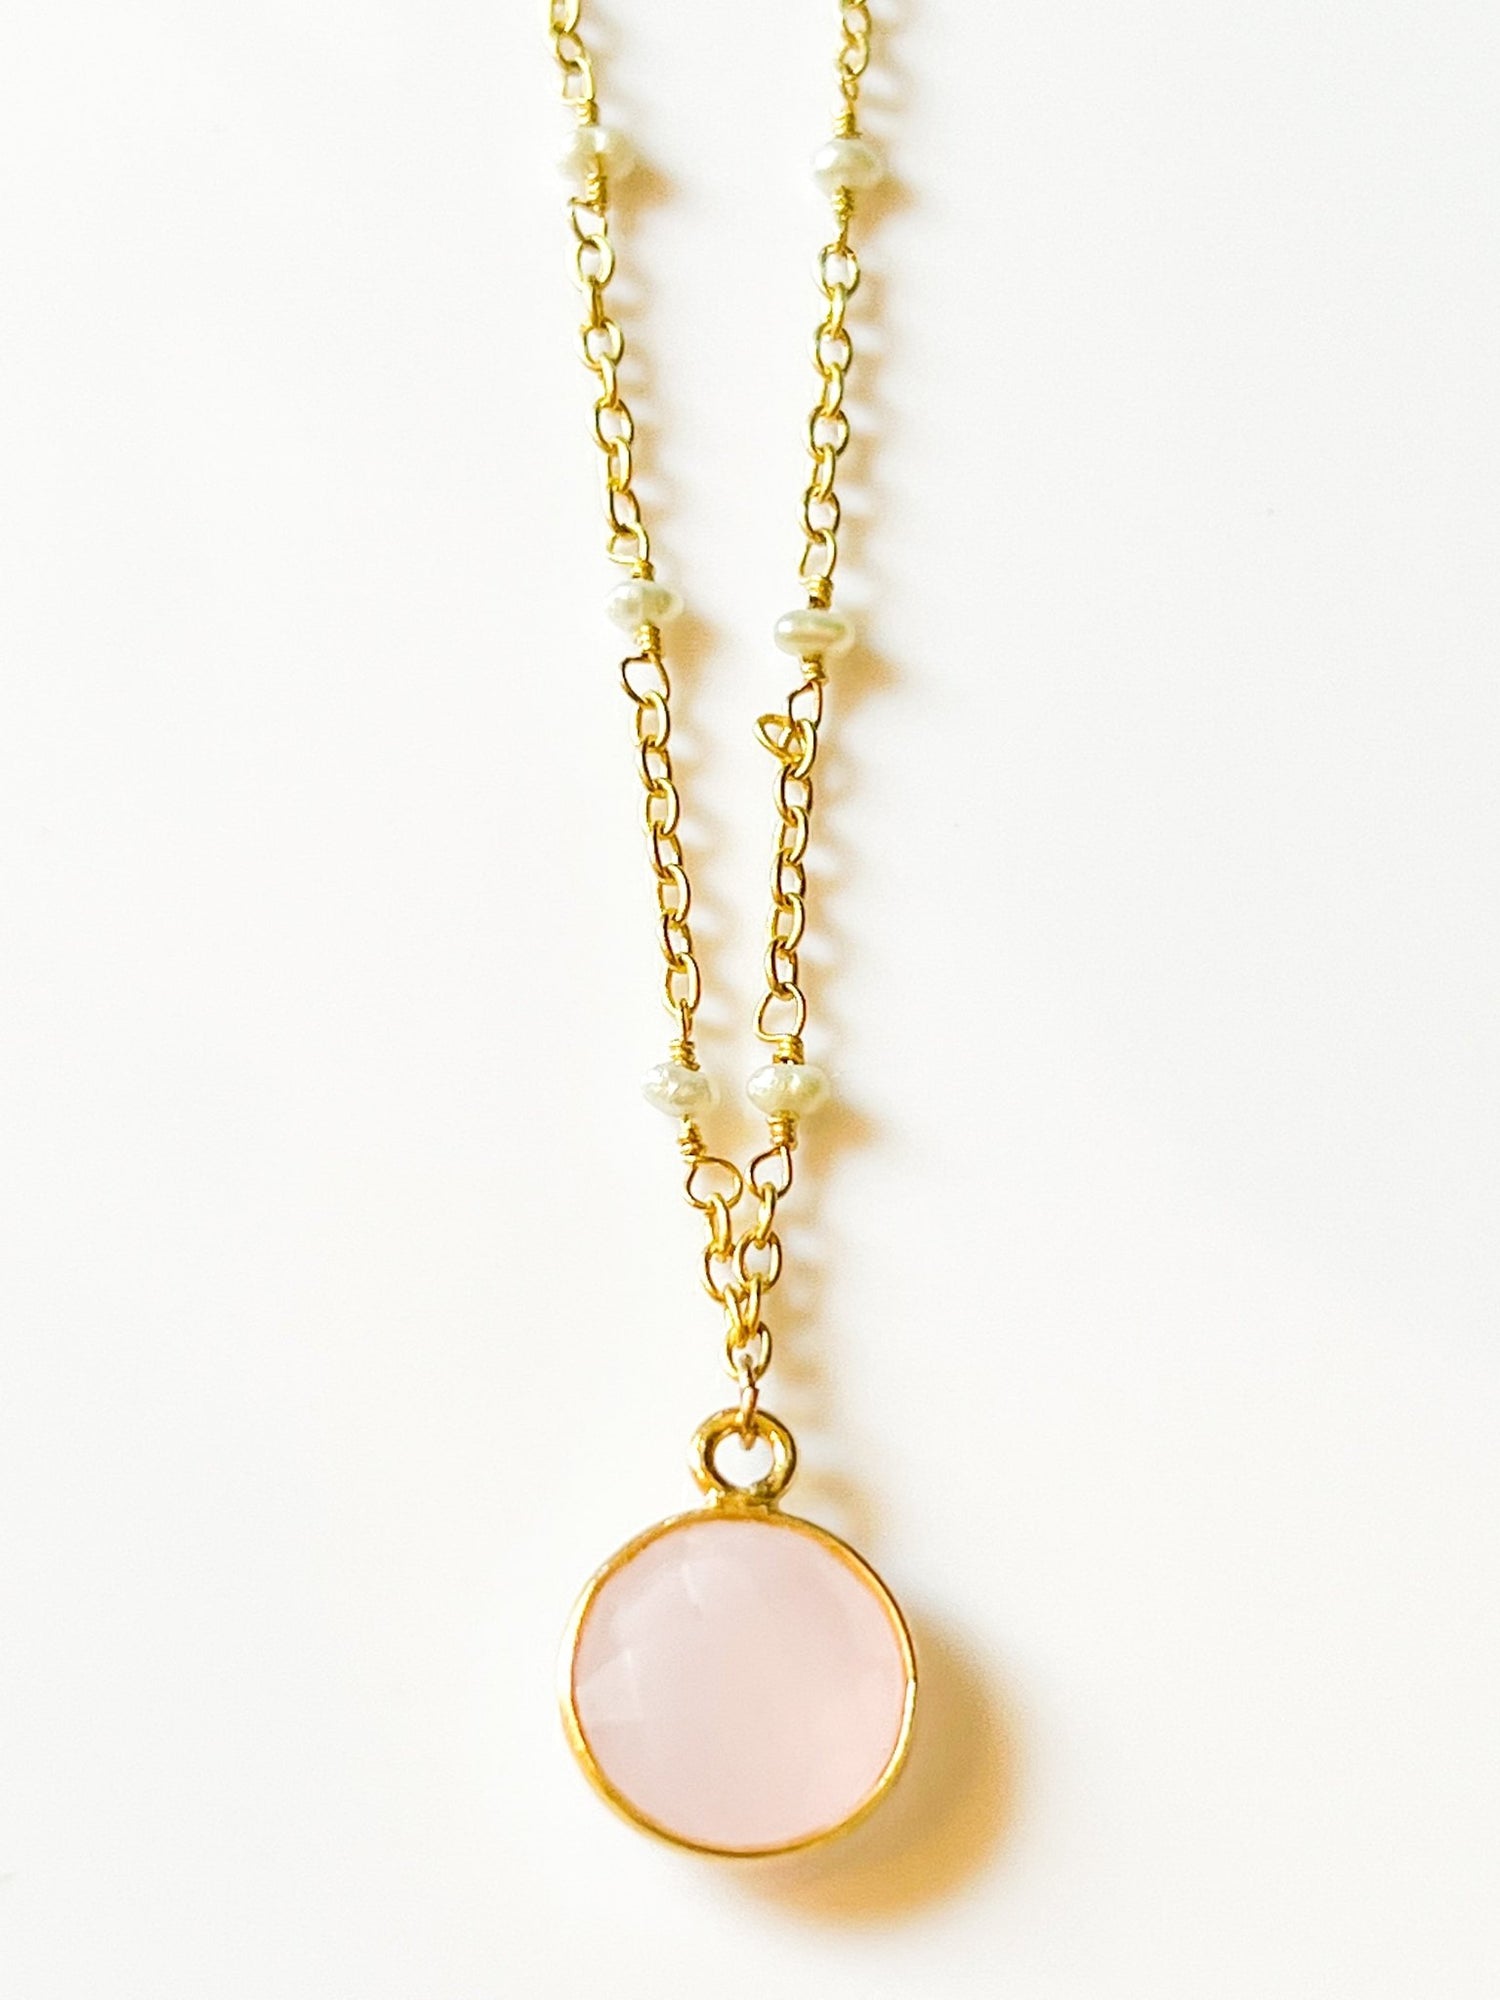 Rose Quartz Charm Drop Necklace on Gold Chain with Freshwater Pearls by Sage Machado - The Sage Lifestyle